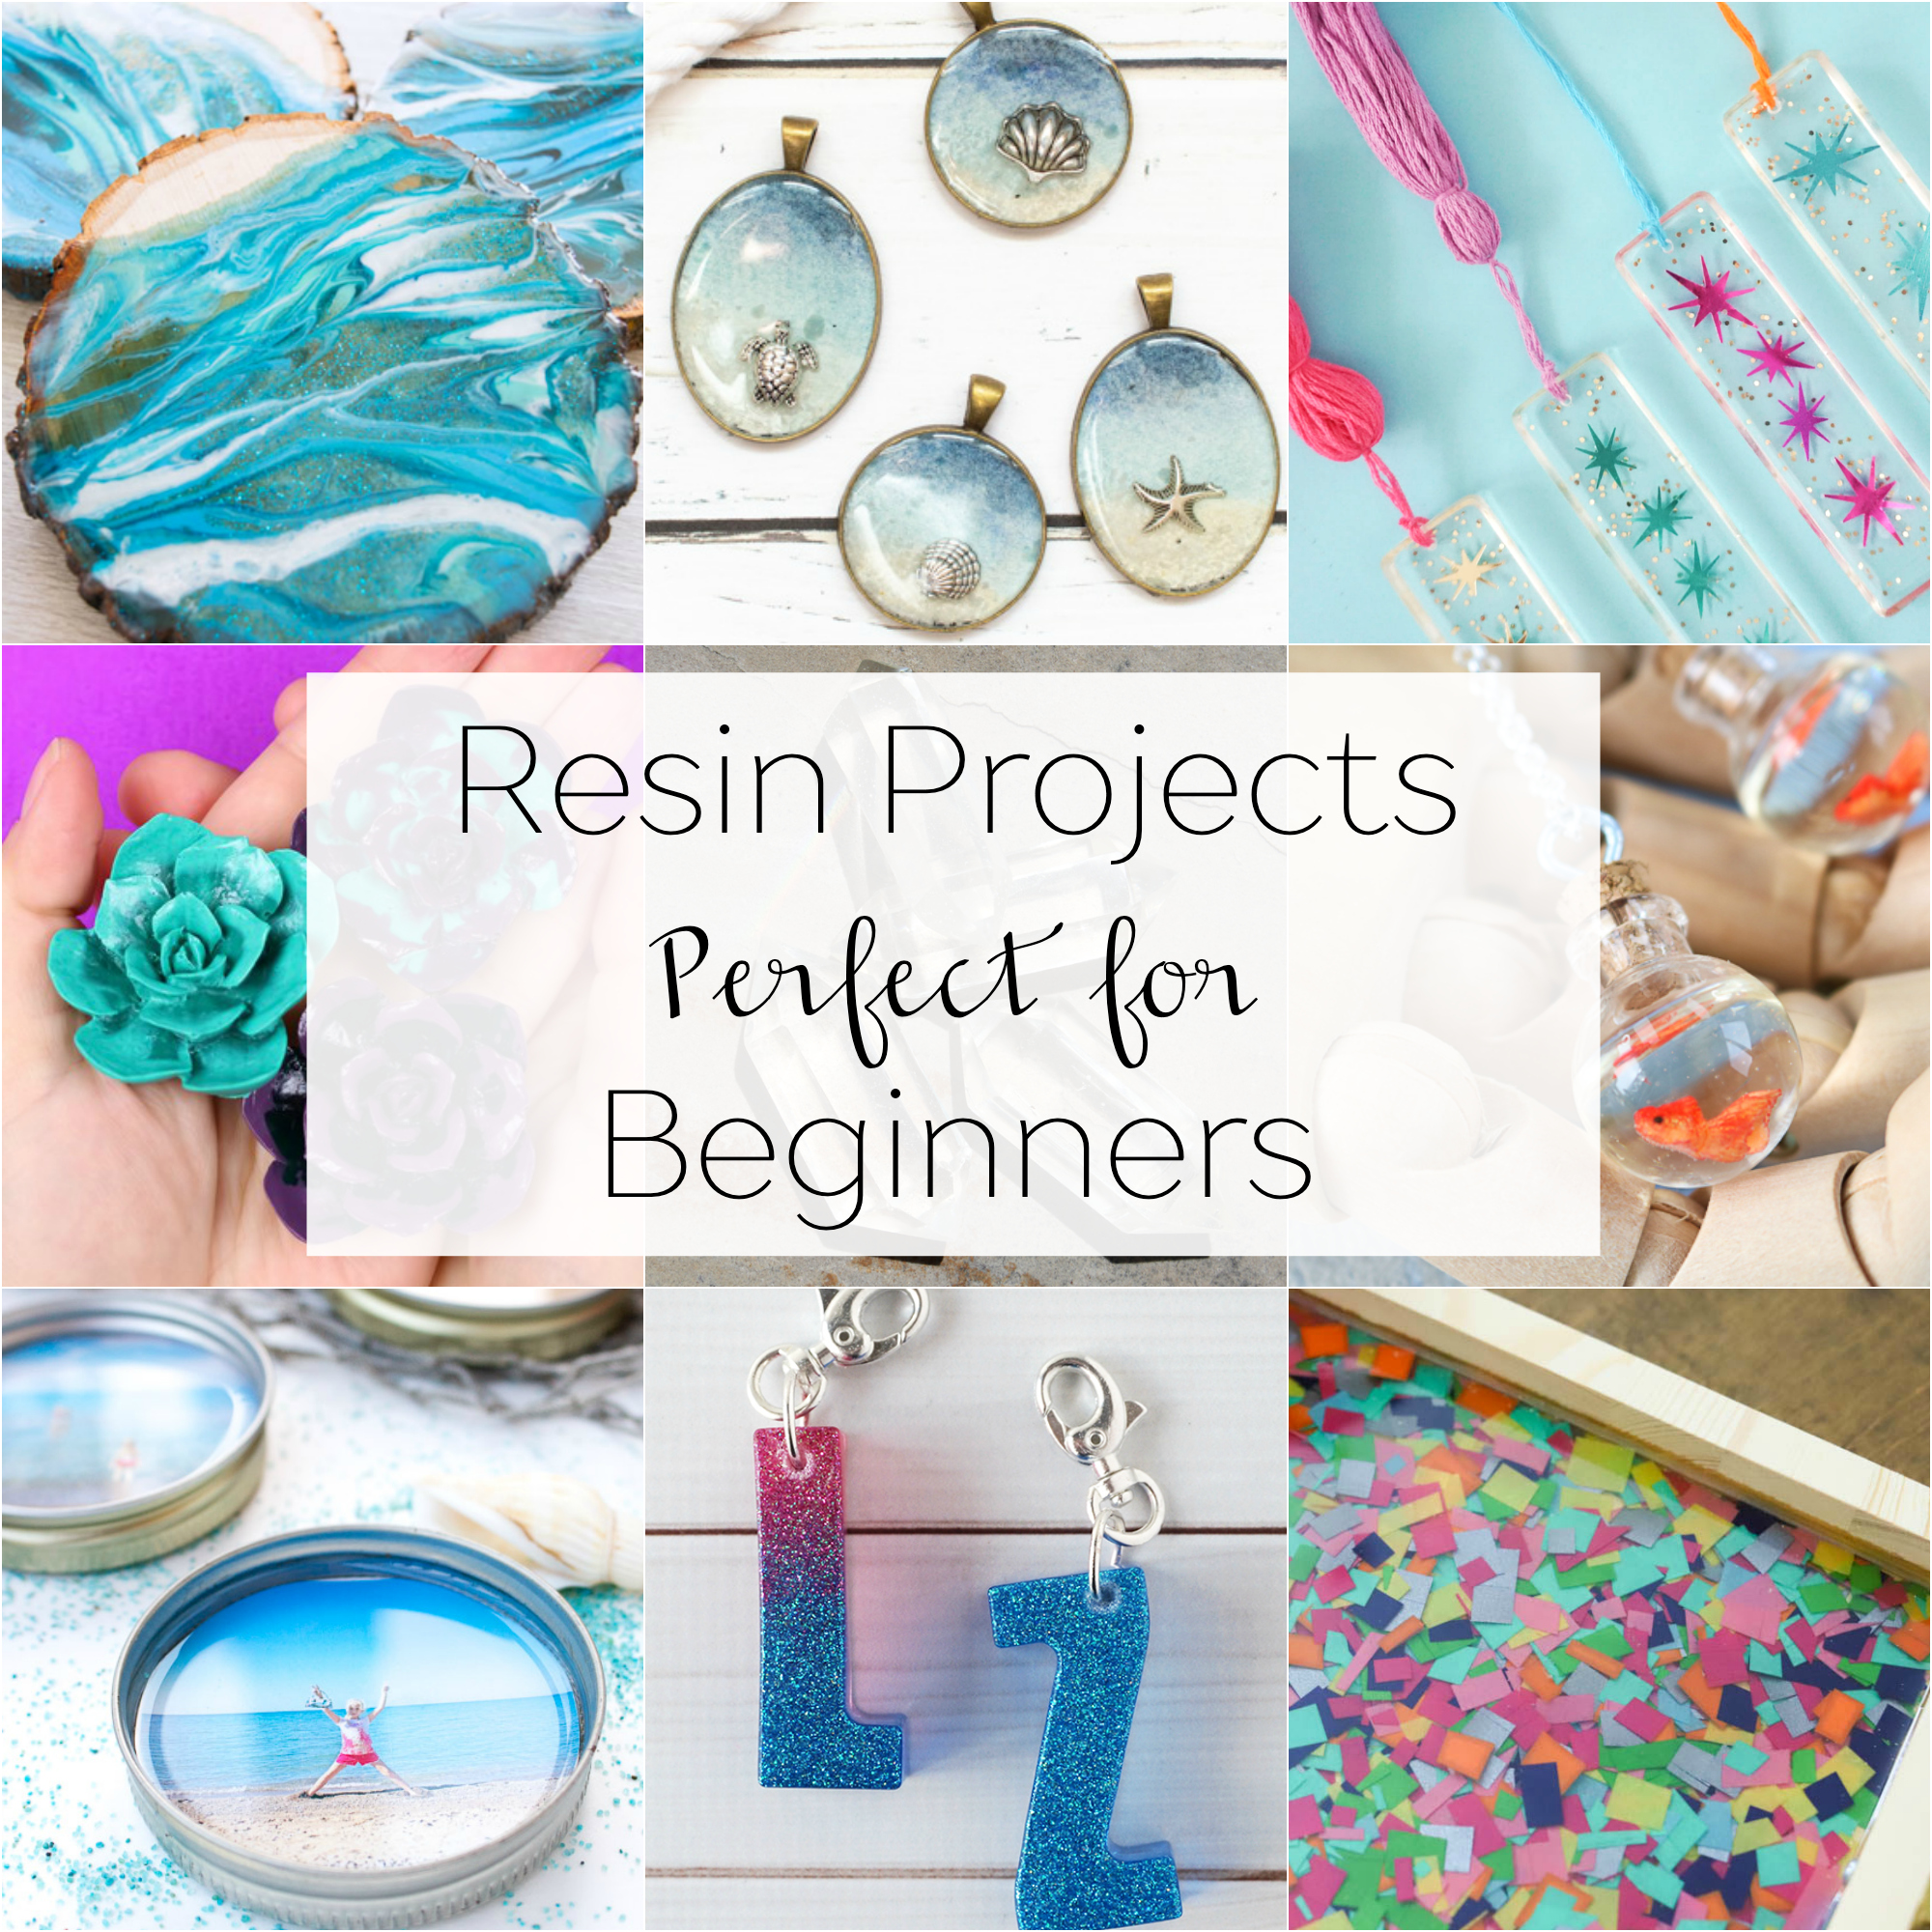 Fabulous Beginner Resin Projects to Try - Resin Crafts